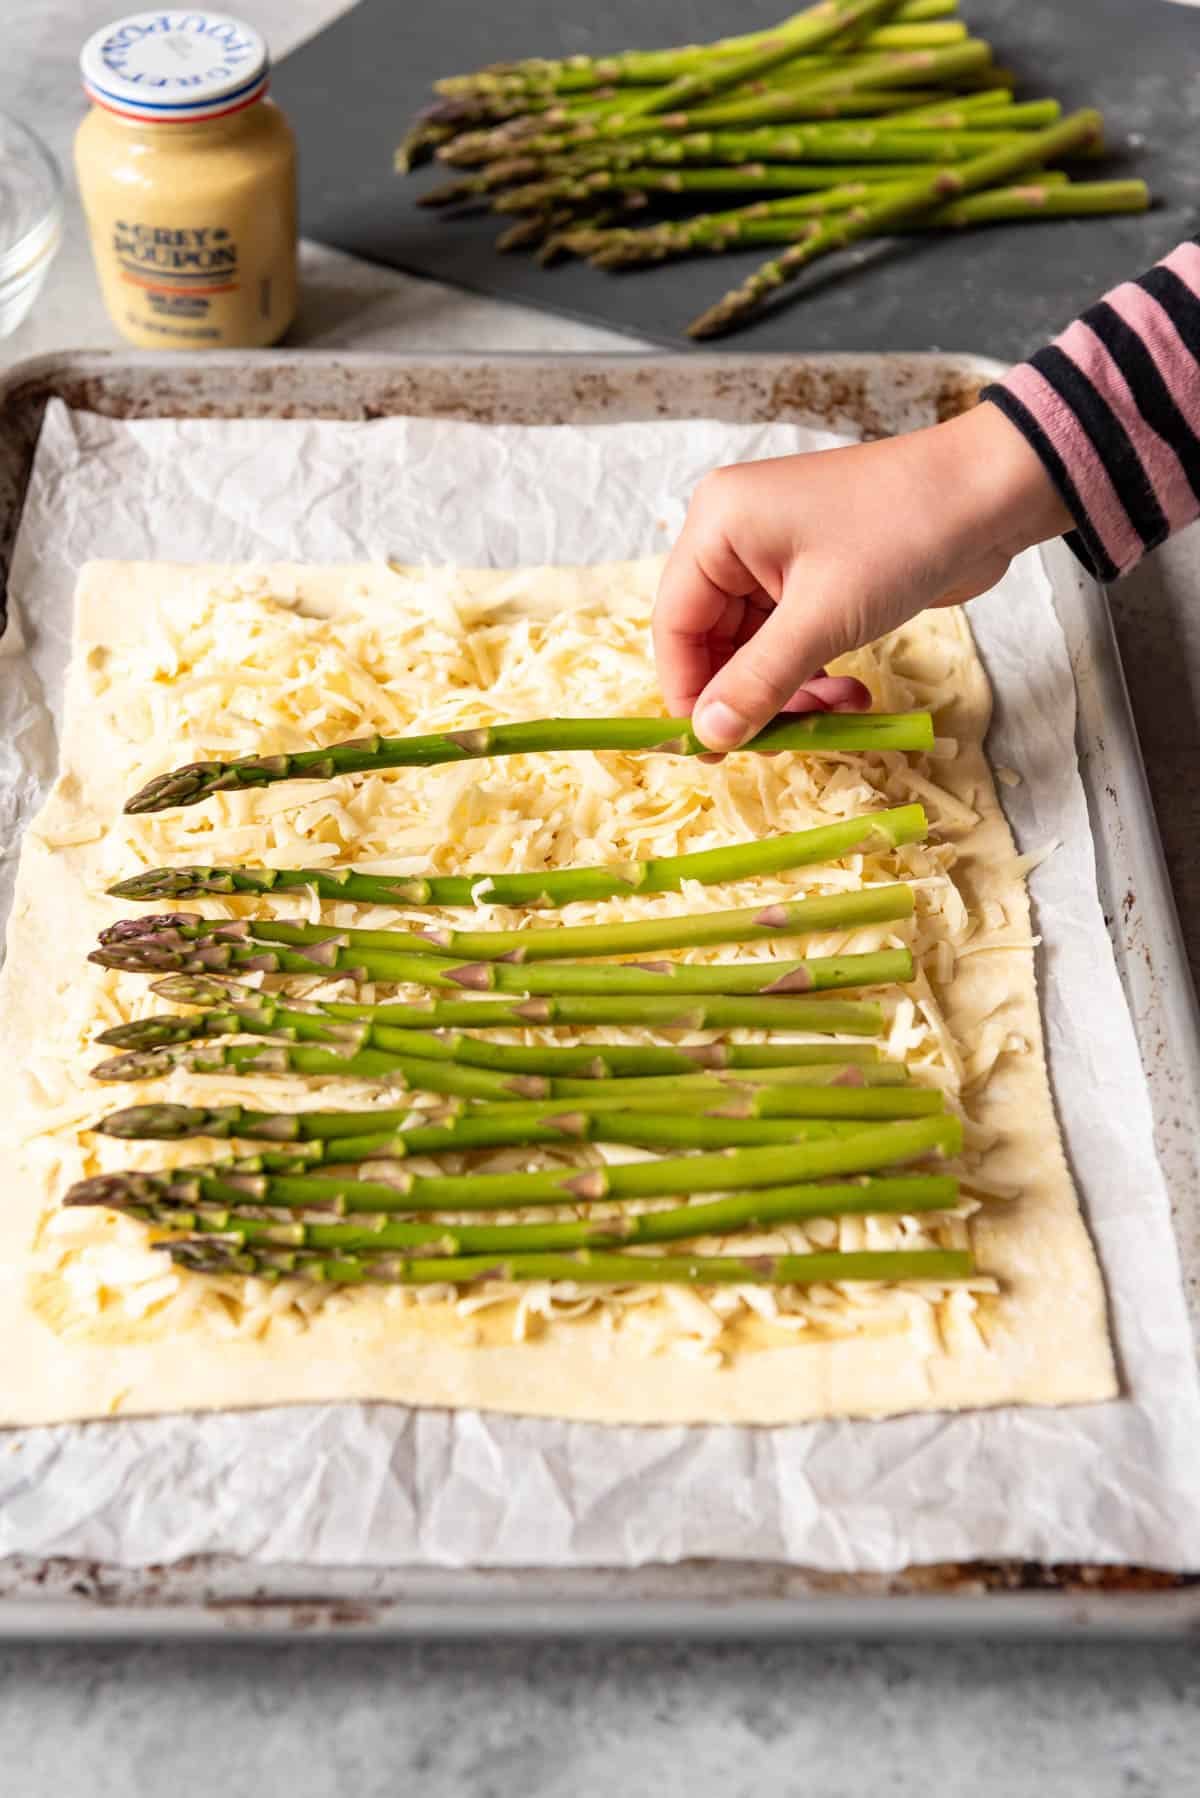 An image of a hand placing a stalk of asparagus on puff pastry sprinkle with cheese.